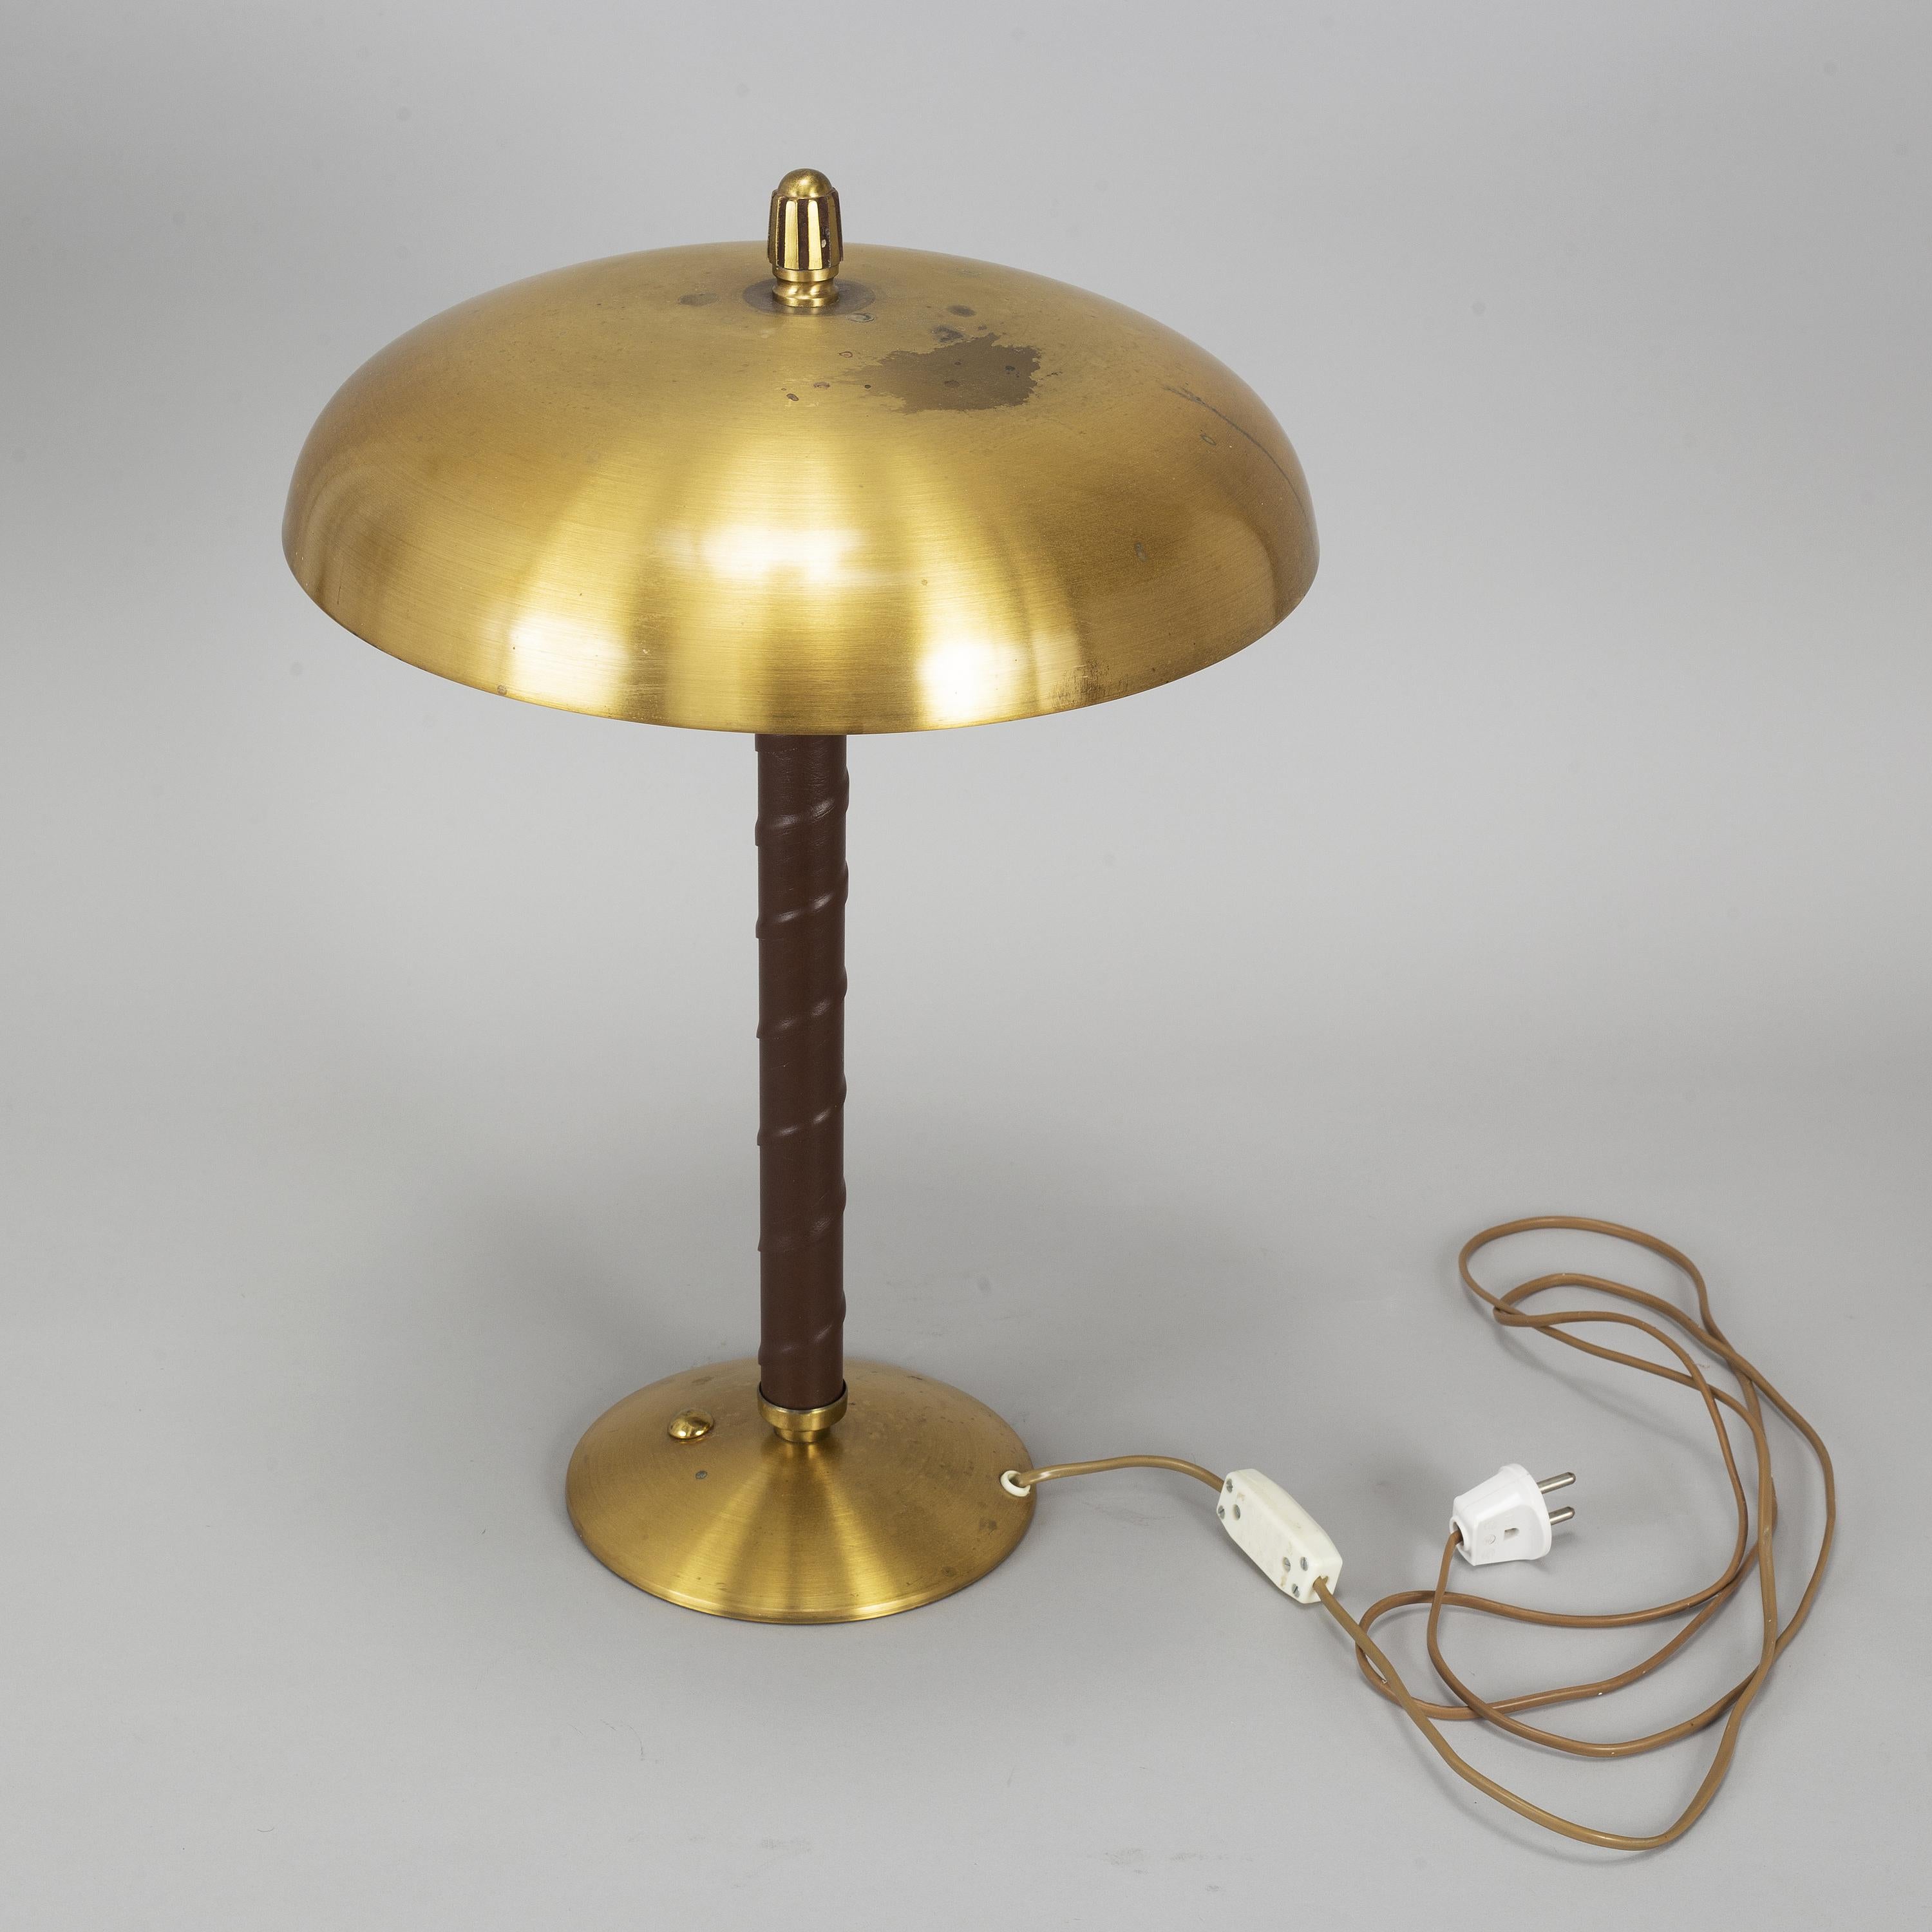 A model 5013 brass dome table light with stem wrapped in leather. 1940's. Presumably made in Malmo, Sweden.